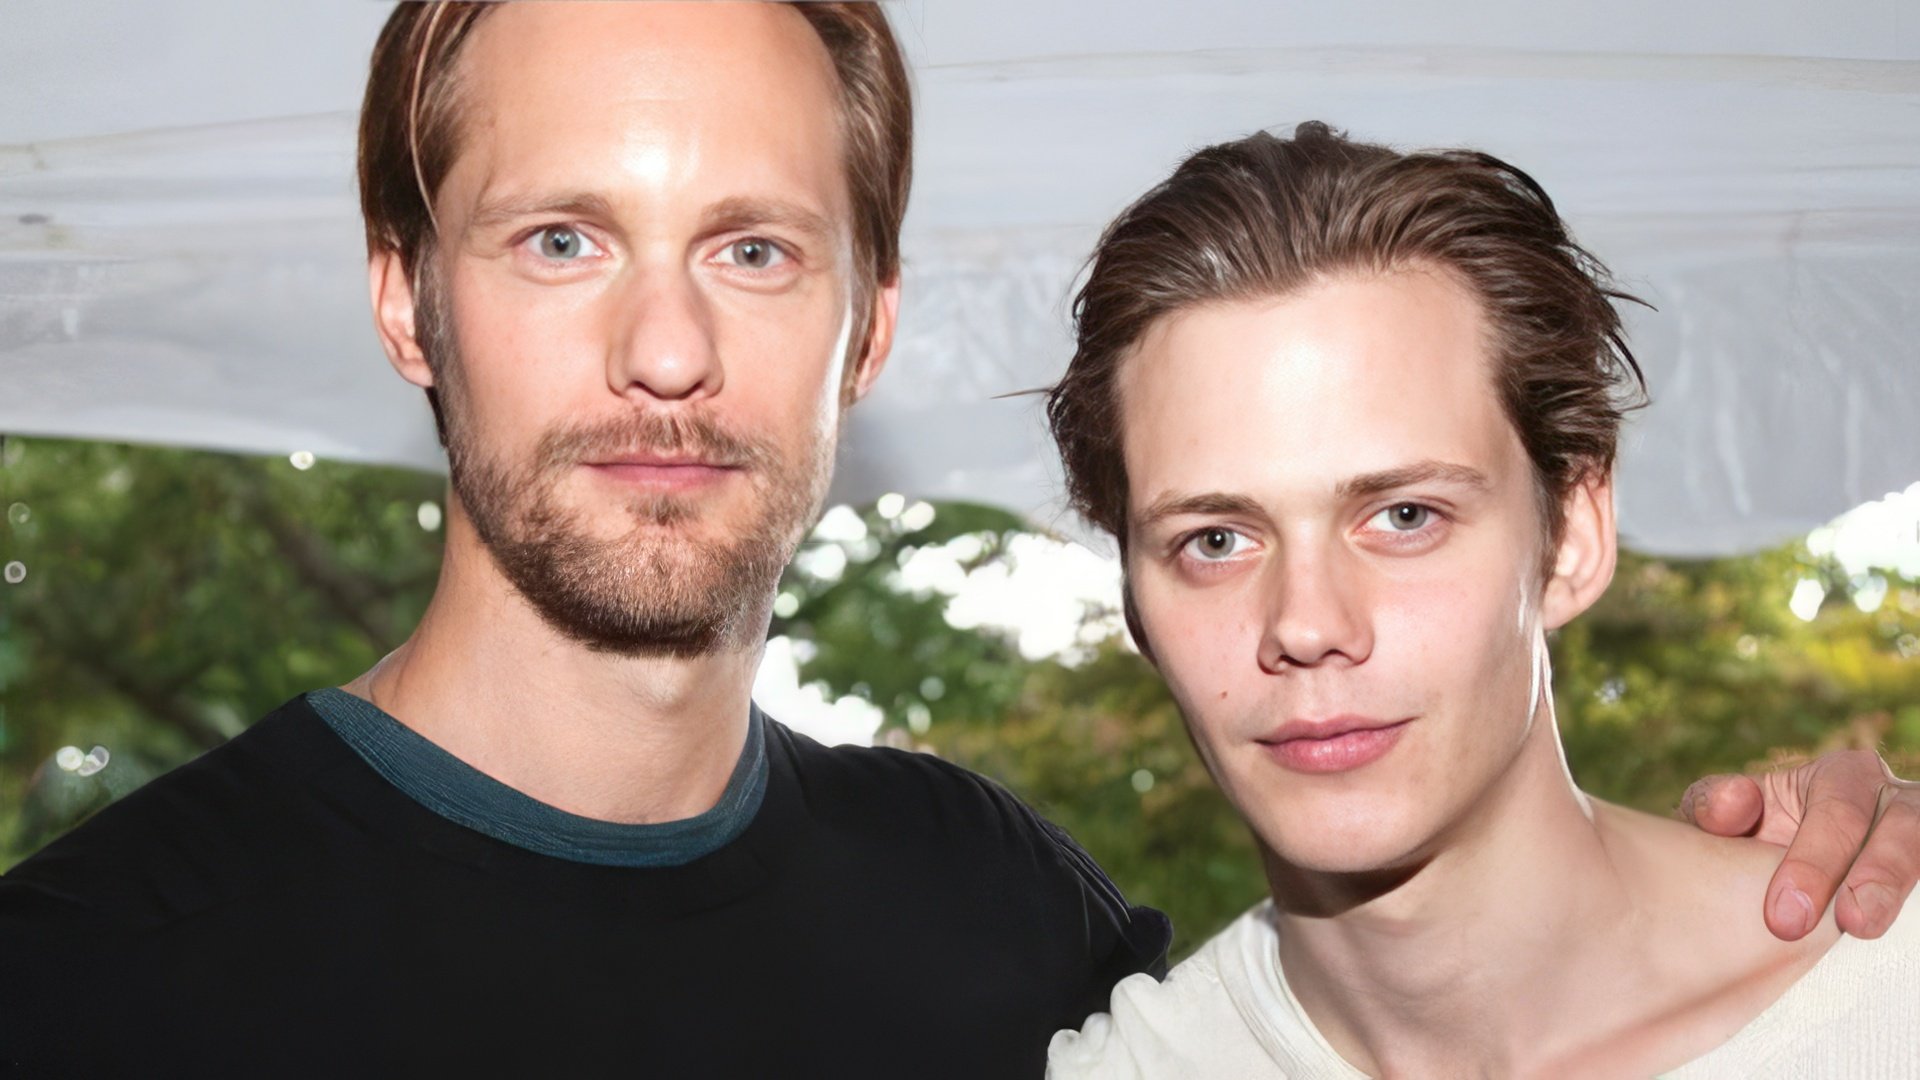 Alexander and Bill Skarsgård are the successors of their acting dynasty